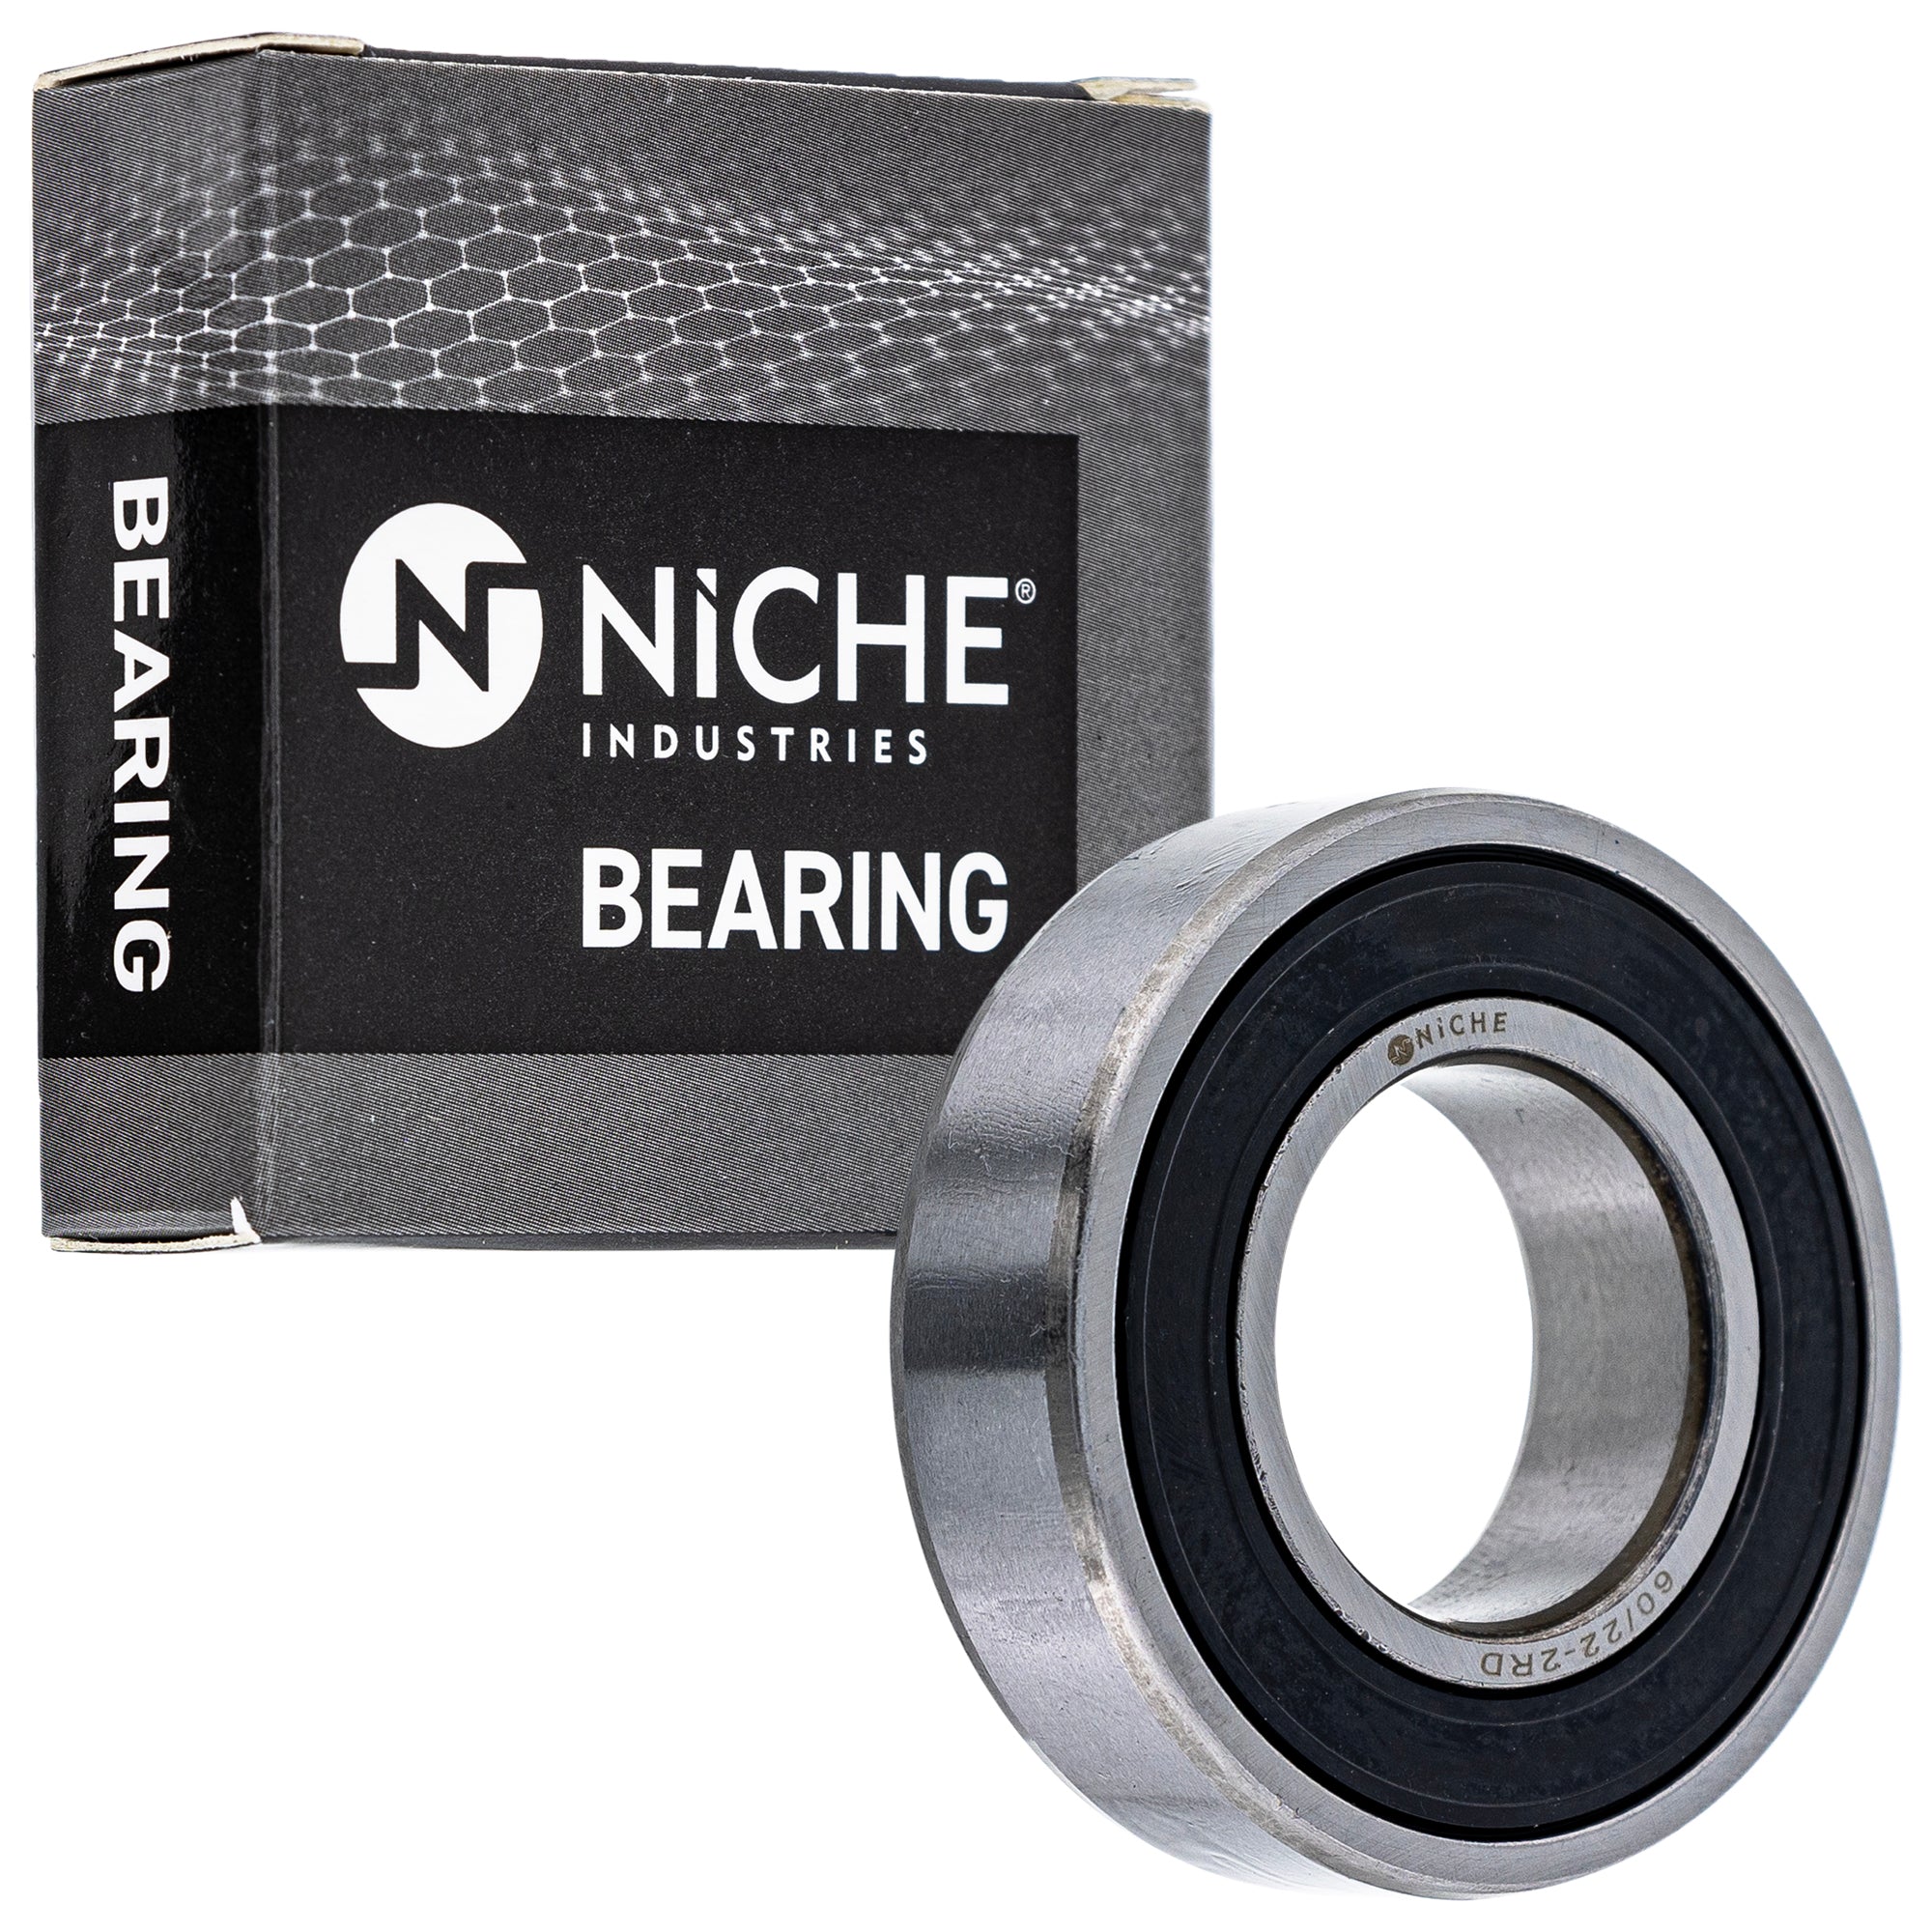 NICHE 519-CBB2320R Bearing 10-Pack for zOTHER YZF750R YZF1000R